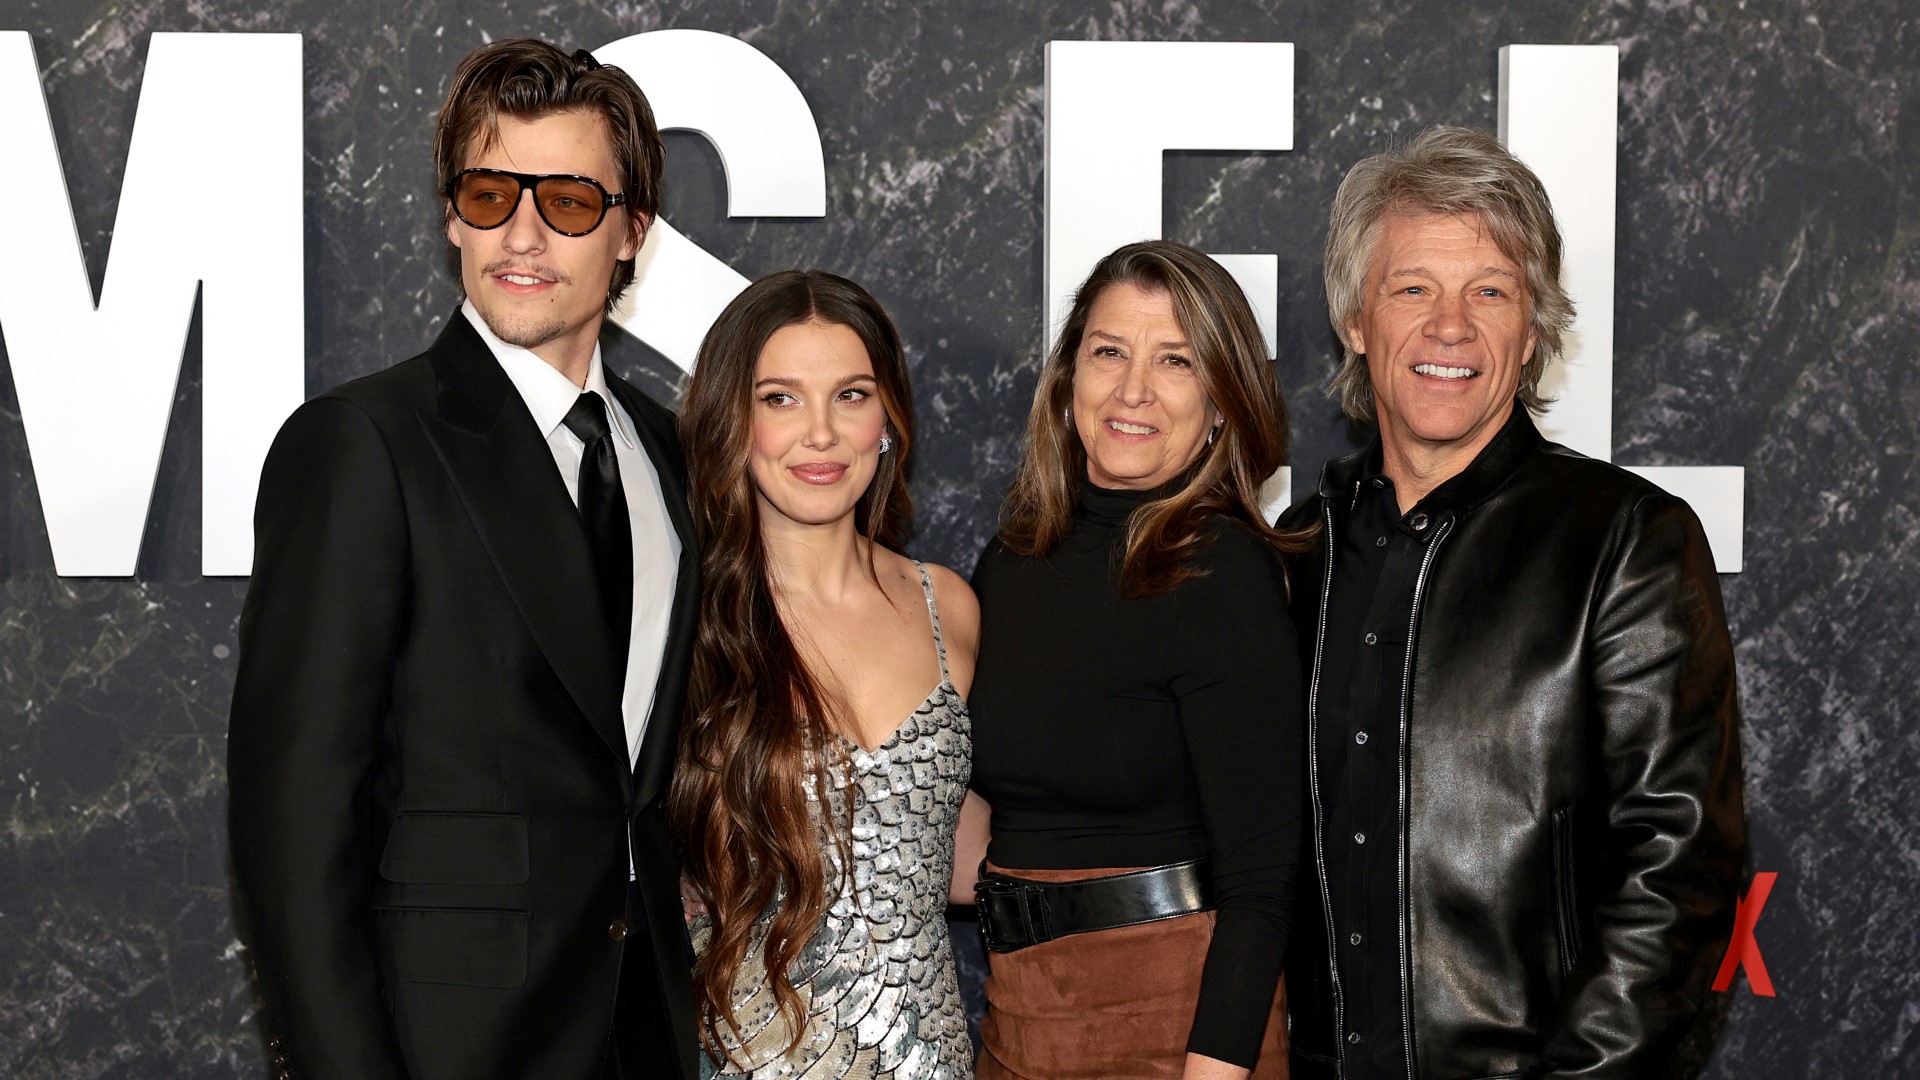 Jon Bon Jovi gushes over the famous, 'gorgeous' bride his son married